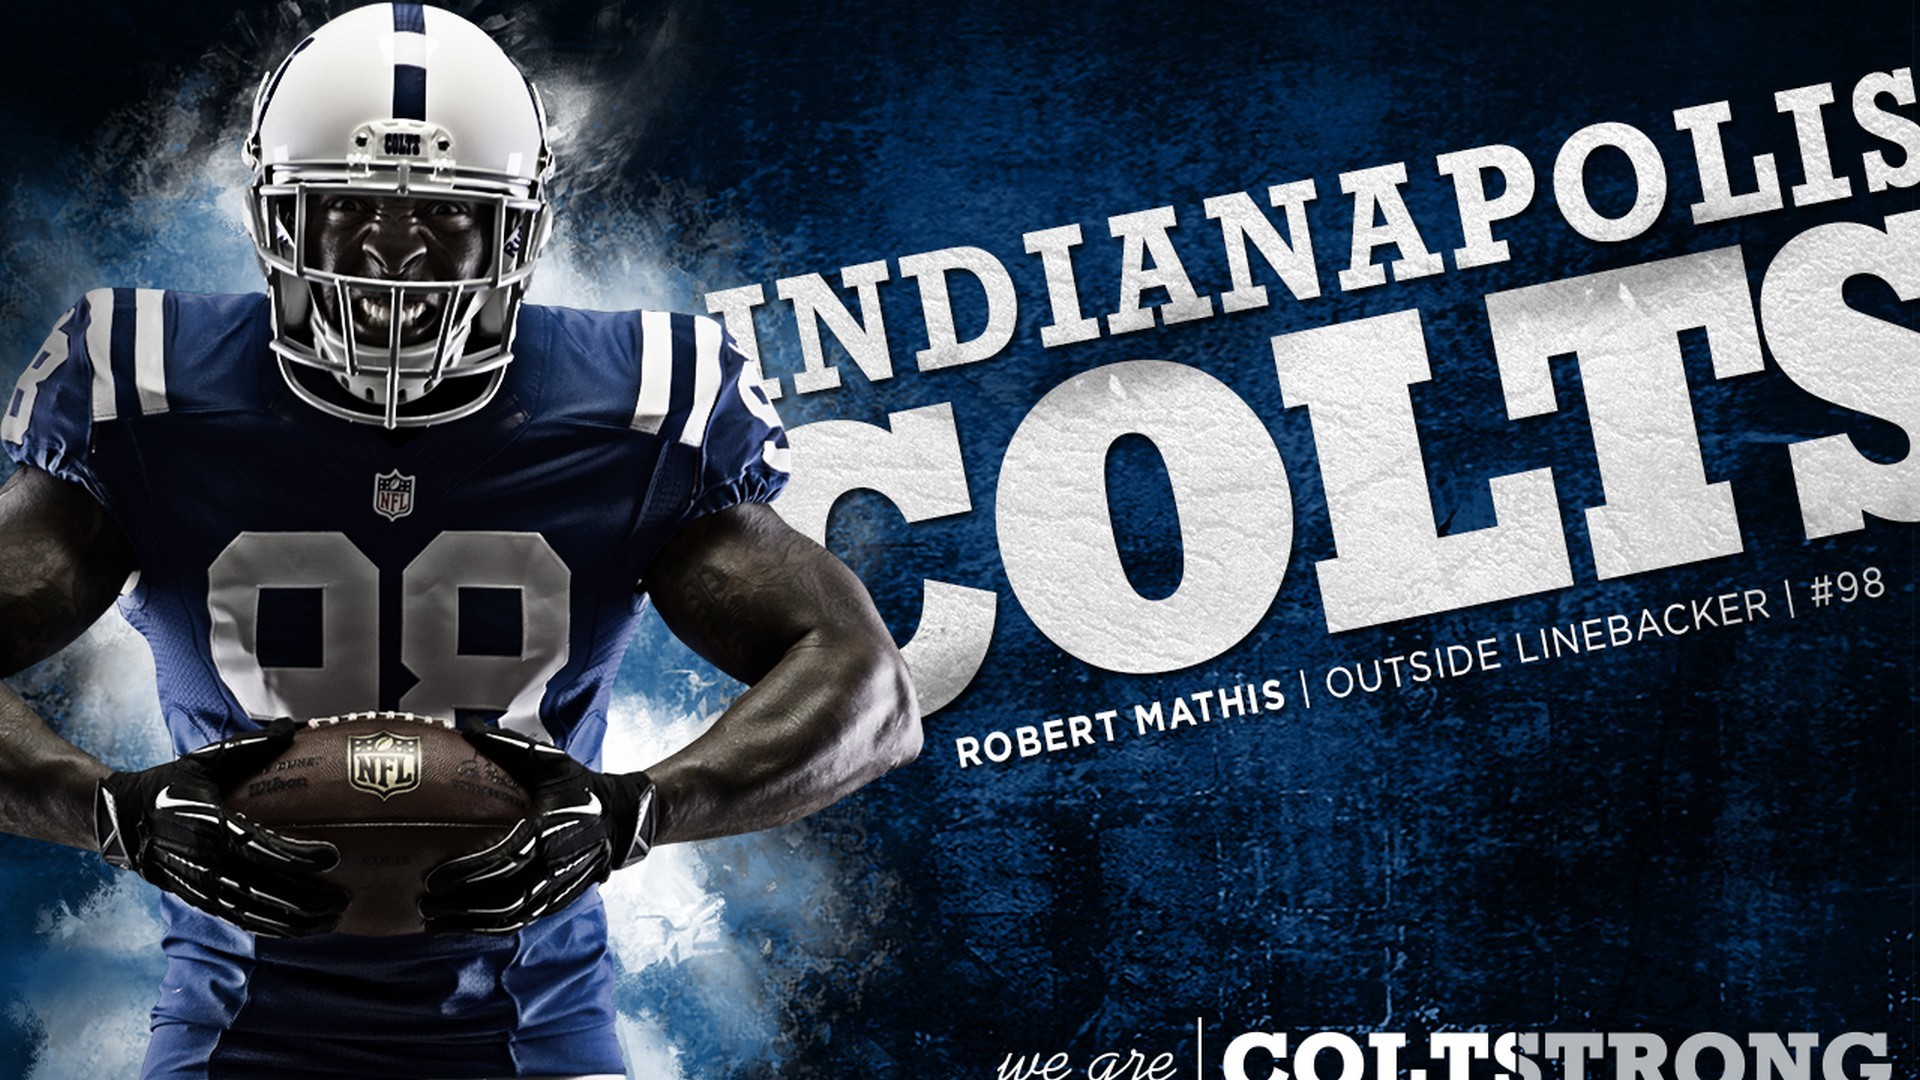 1920x1080 Indianapolis Colts NFL Wallpaper with resolution  pixel. You can  make this wallpaper for your